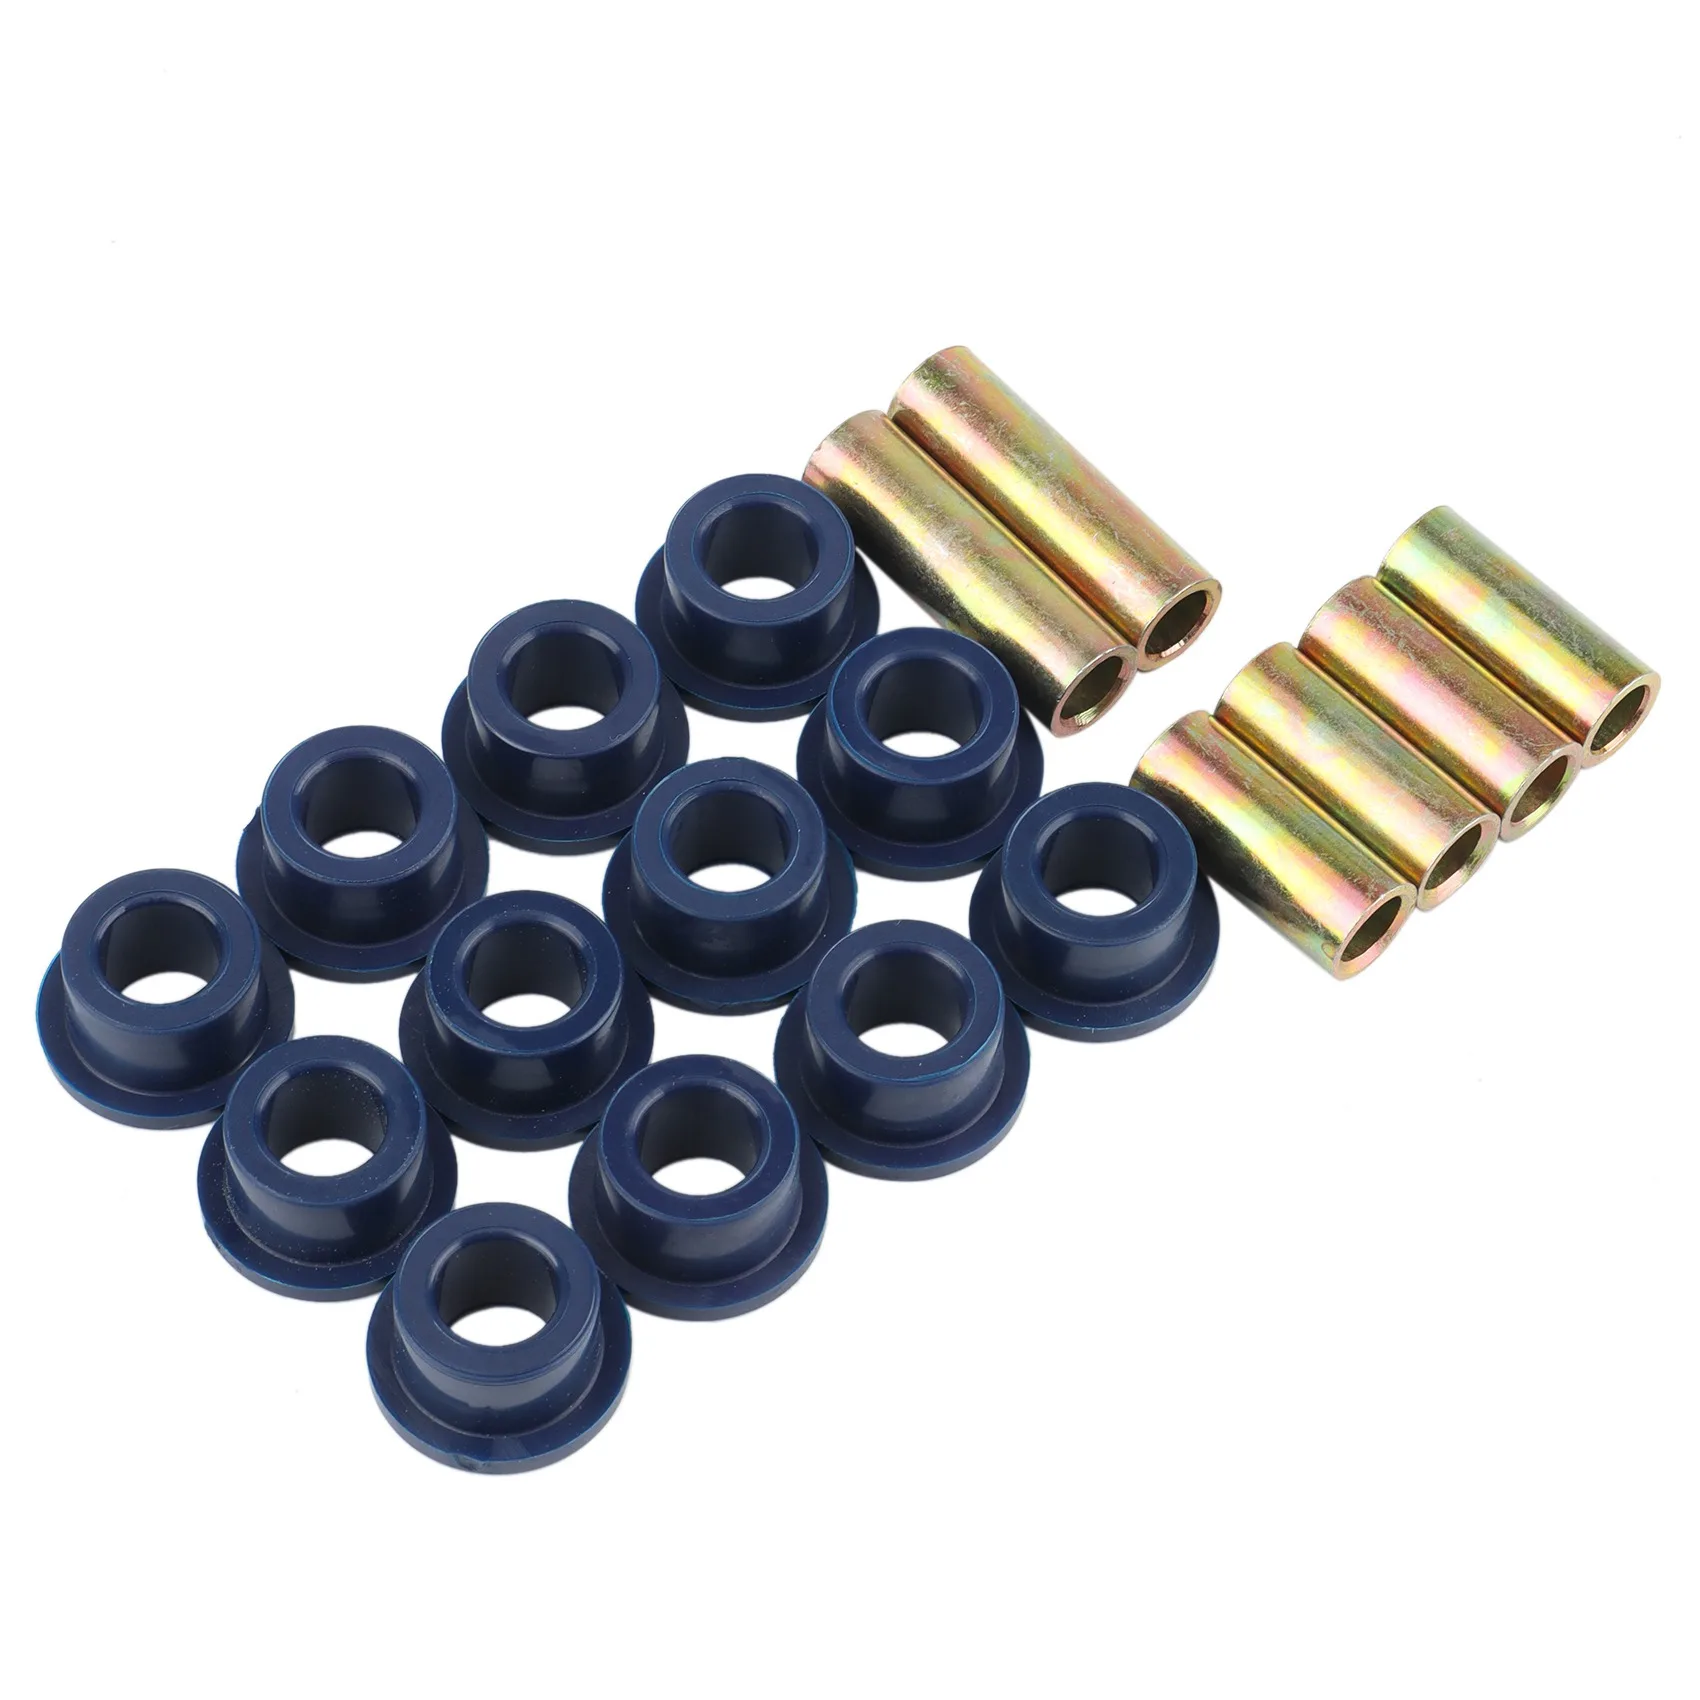 

Front Lower Spring+Front Upper A Arm Suspension for Club Car Bushing Kits,Replace Bushings 1016346,1016349,1016350,Blue